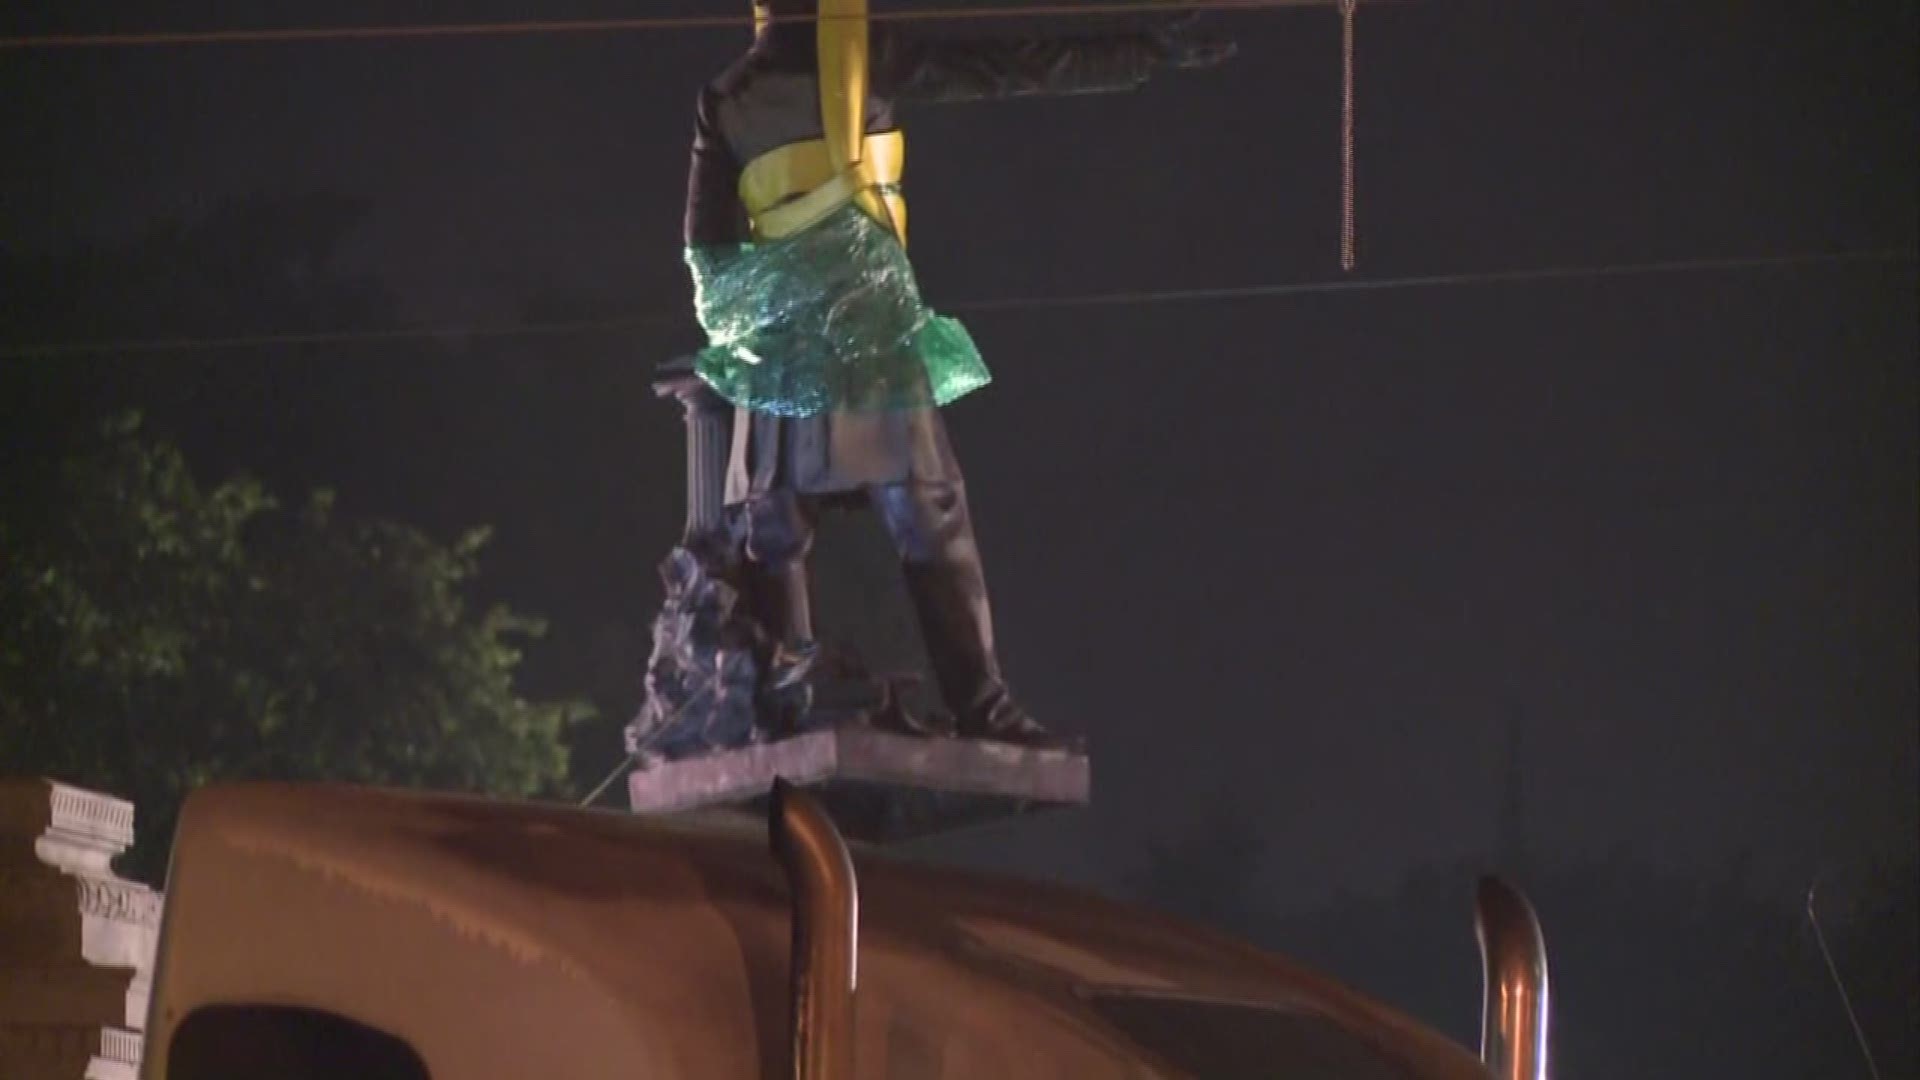 The monument to Jefferson Davis, the former president of the Confederacy was removed just after 5 a.m. while the Eyewitness Morning News was on the air. 